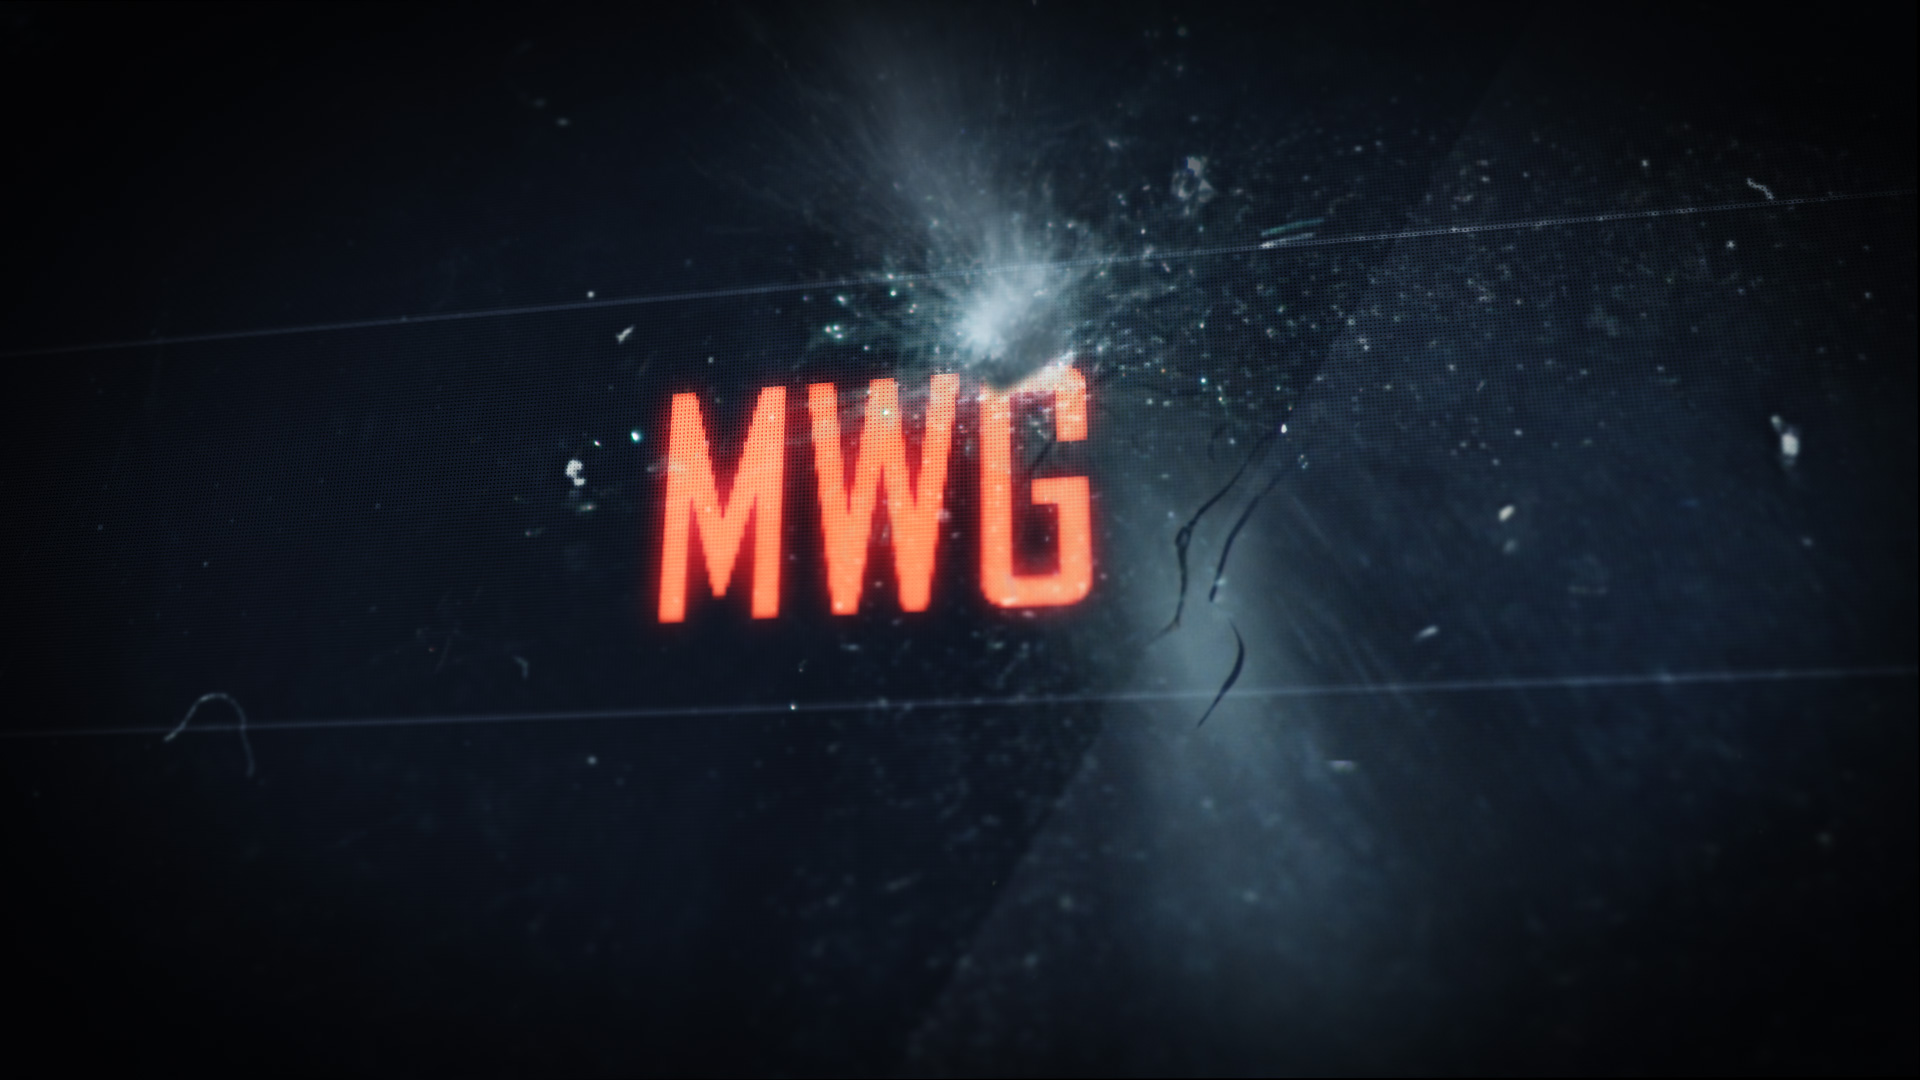 MWG (Working Title, 2018/2019)